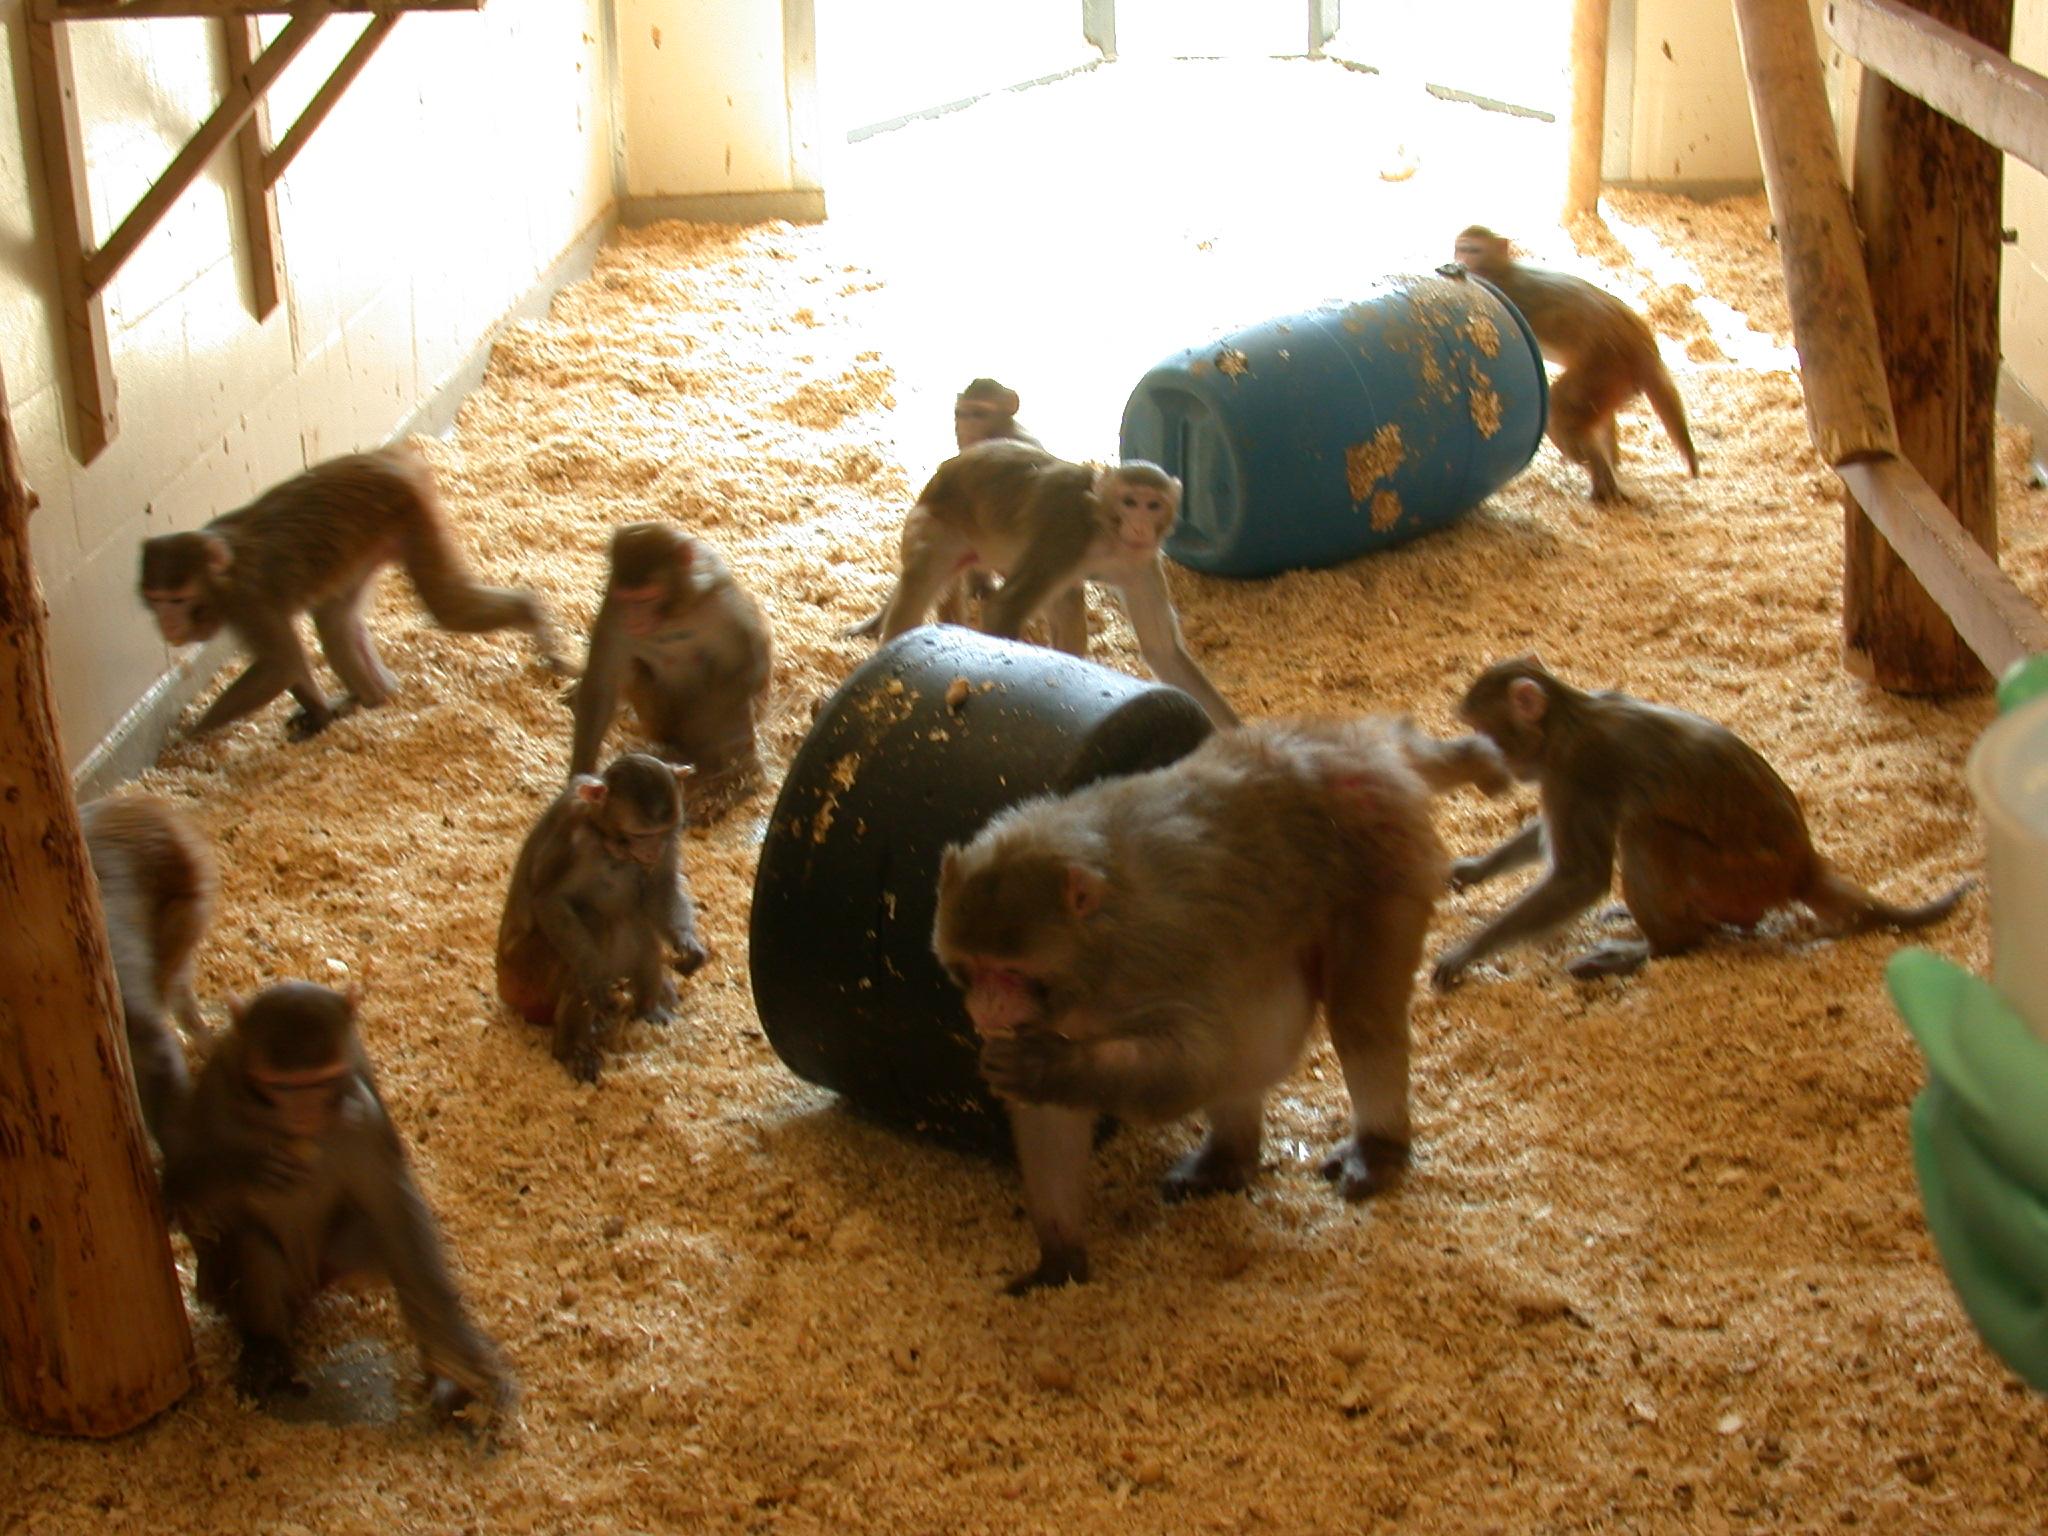 Socially housed macaques forage through sawdust and bedding in their indoor enclosure for food